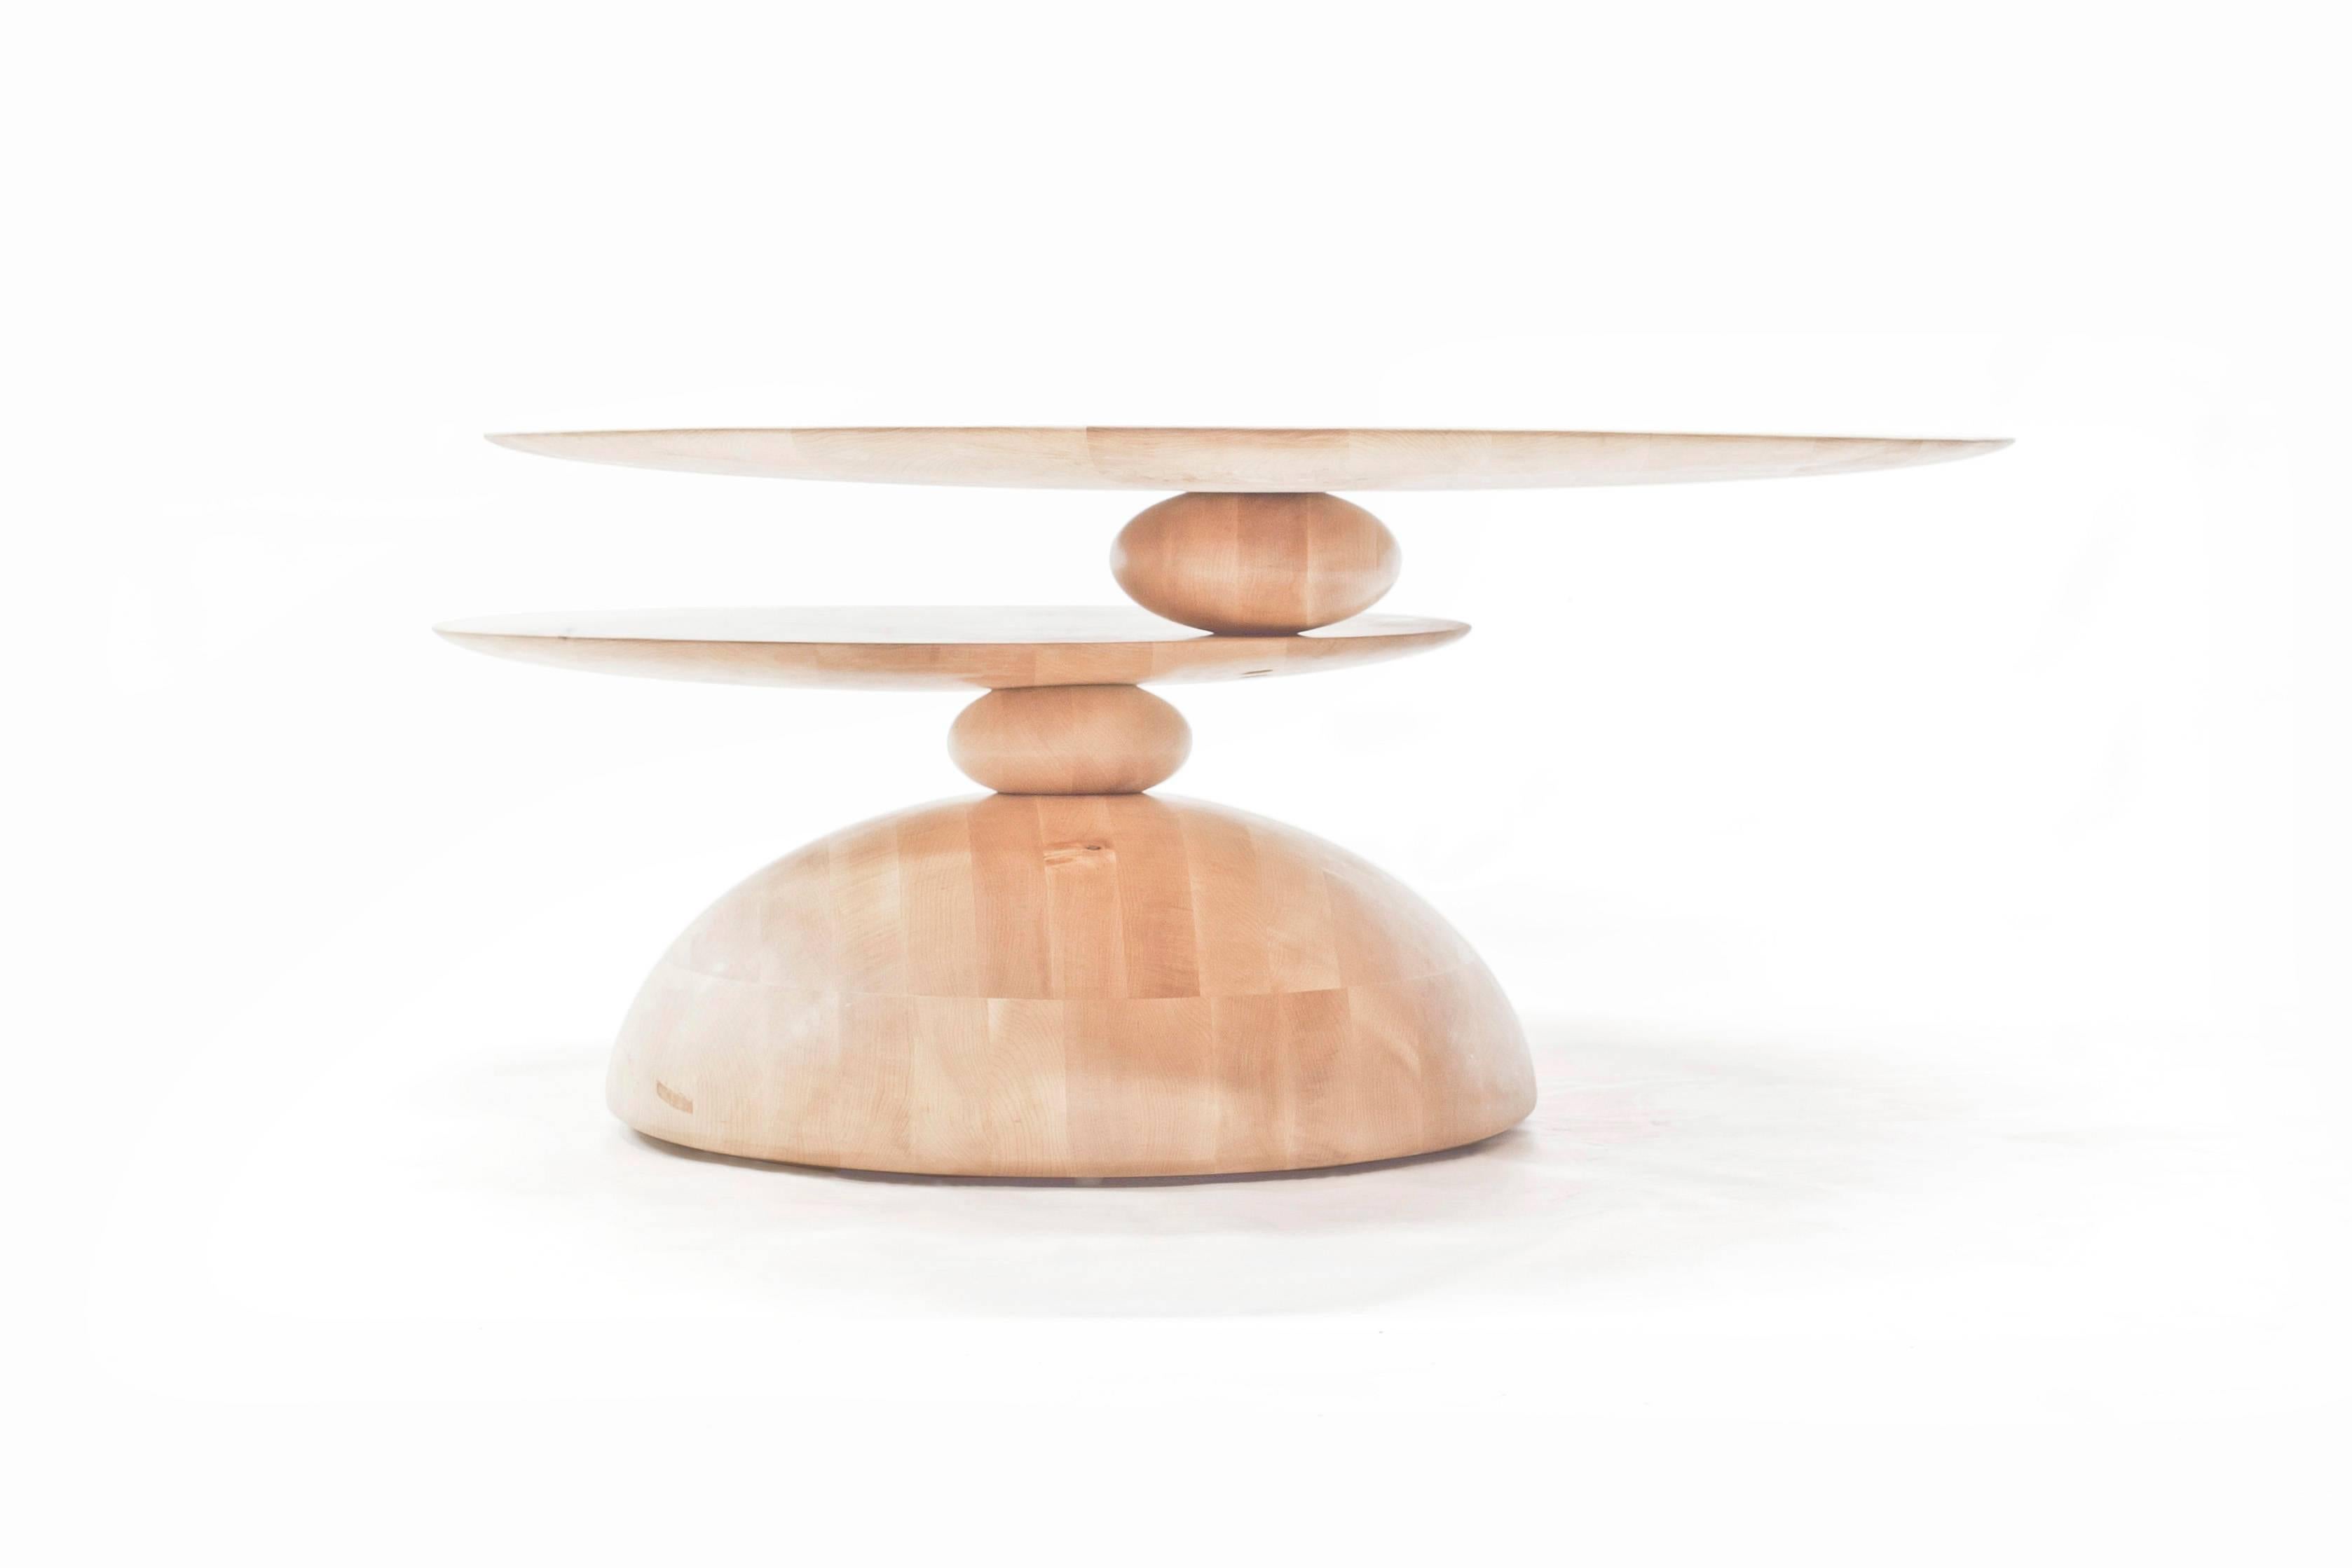 The Cairn collection by Alvaro Uribe for Wooda challenges the perception of furniture being purely functional. We believe furniture brings a sense of spirituality and magic to our lives. Taking inspiration from ancient cairns, each design is